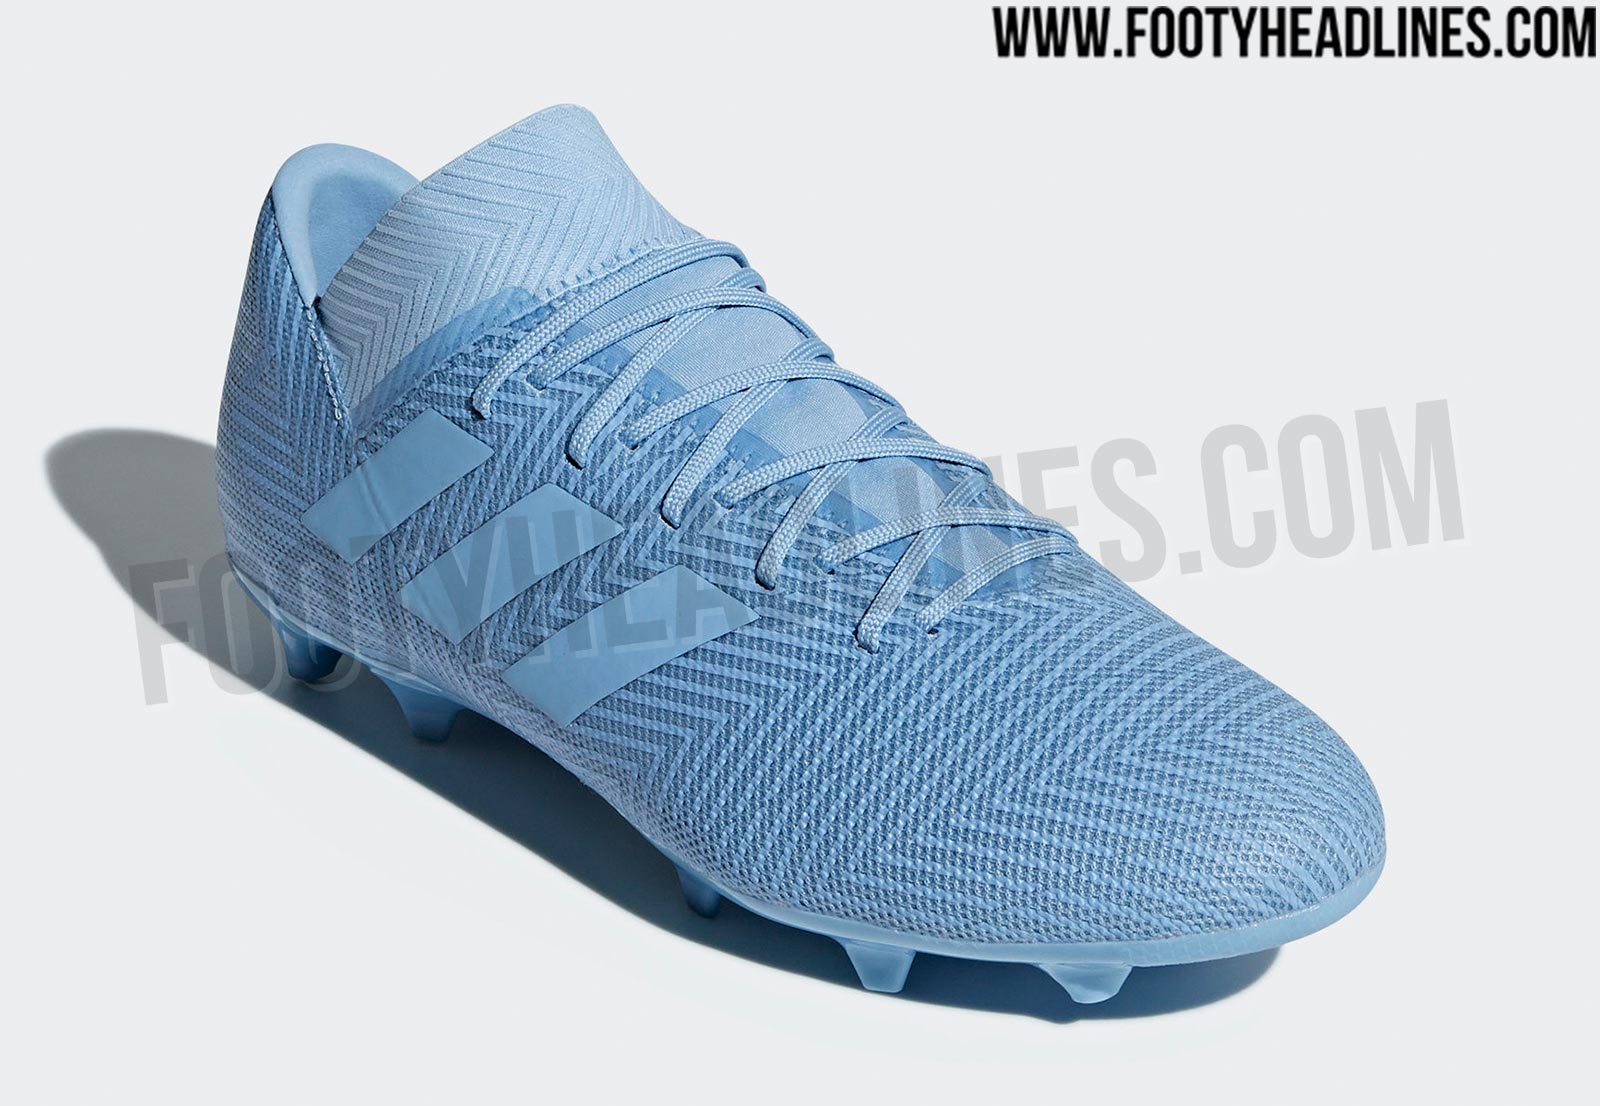 adidas messi boots 2018